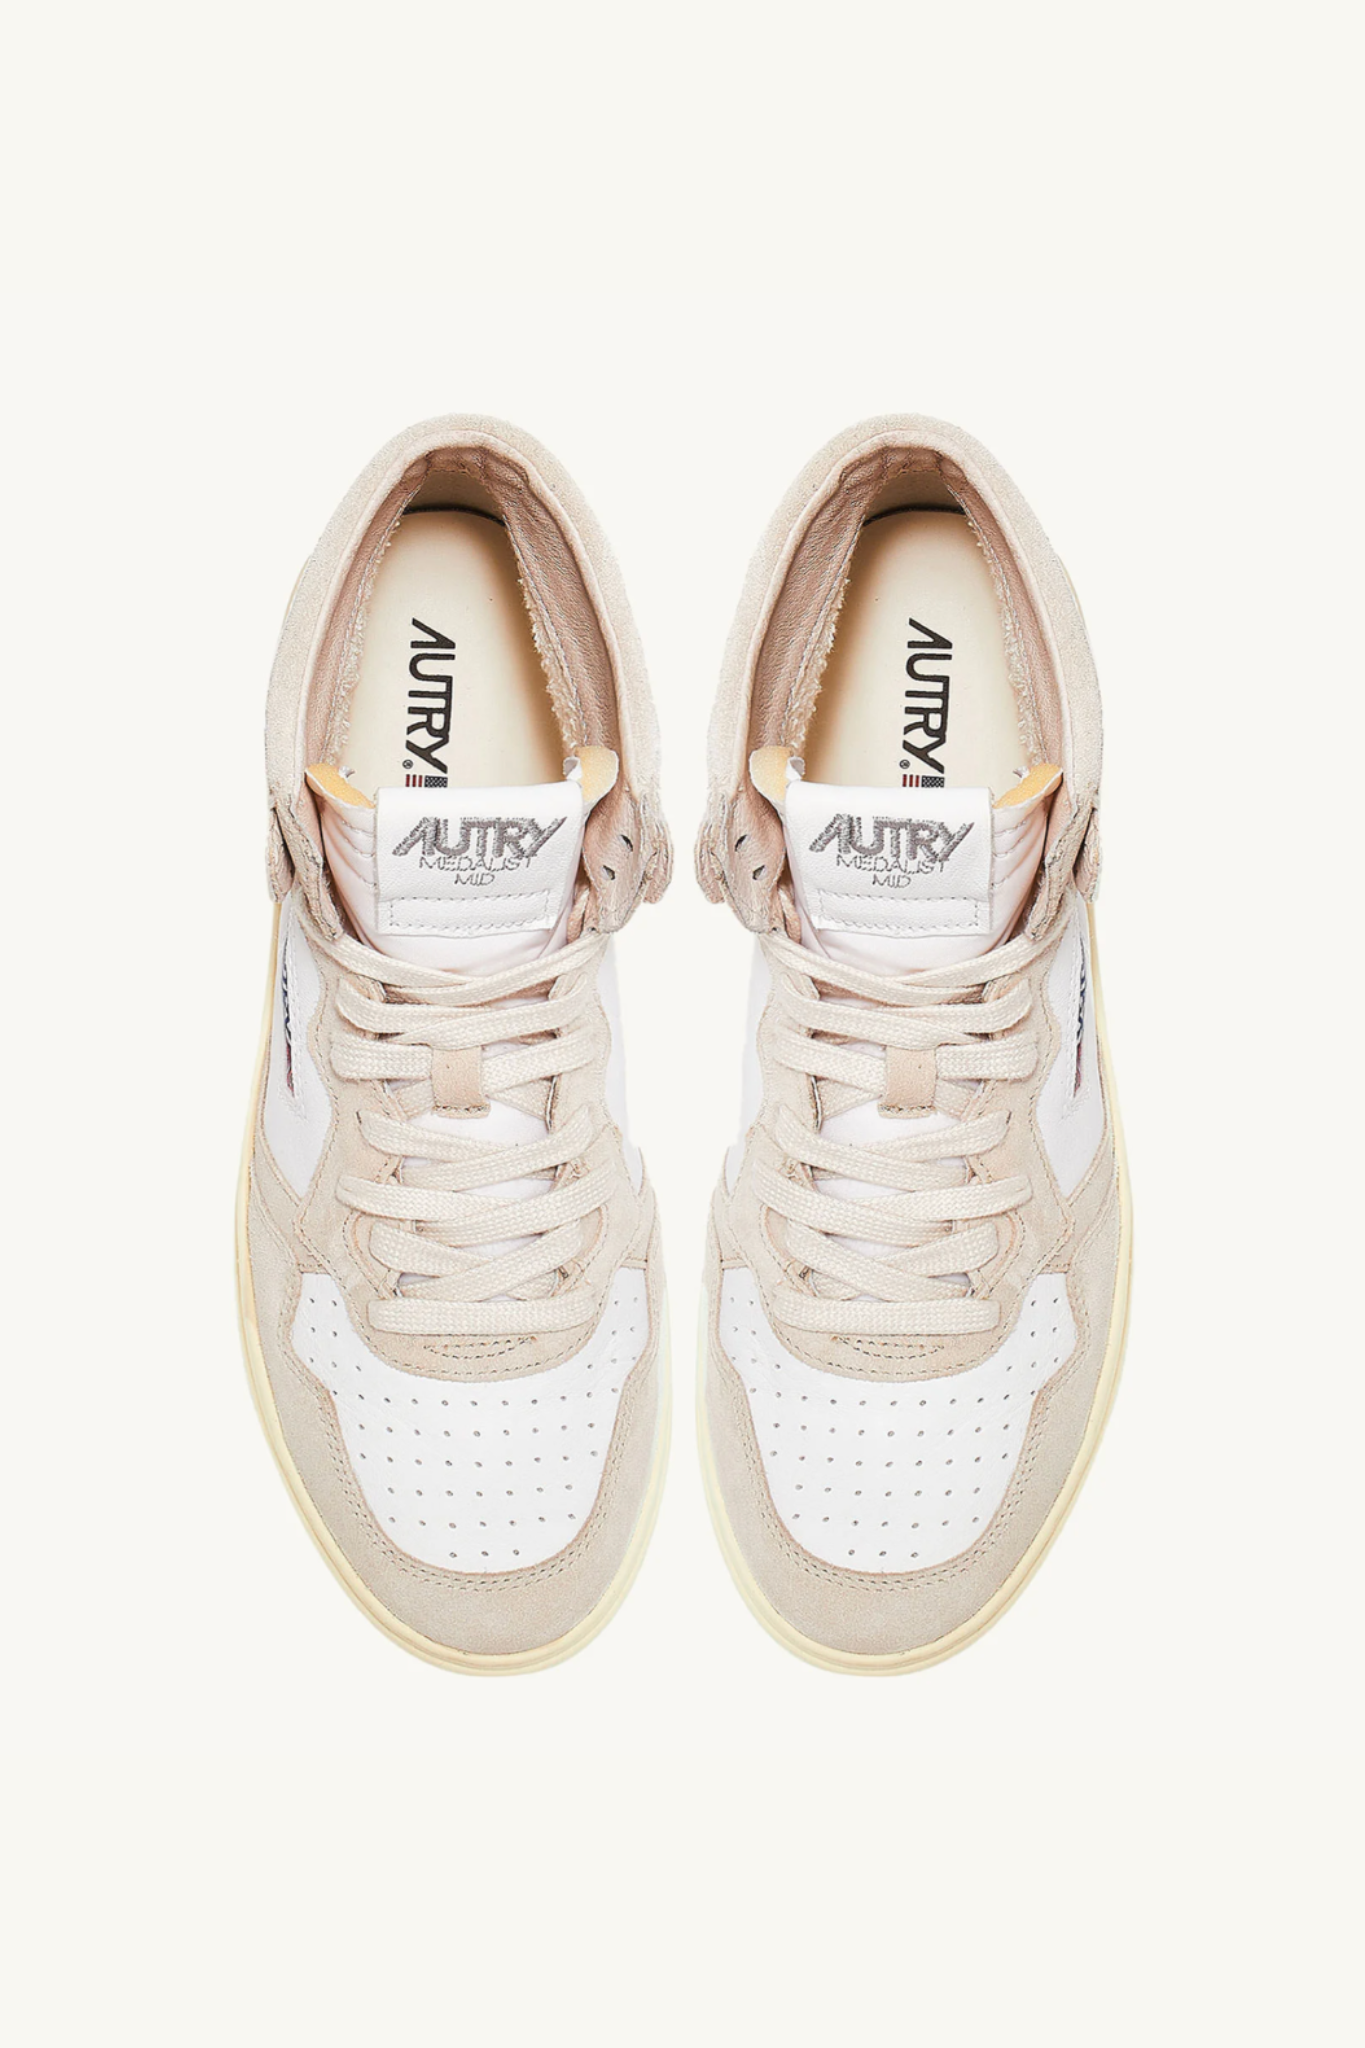 AUMM-GS04 - MEDALIST MID SNEAKERS IN WHITE GOATSKIN AND SUEDE